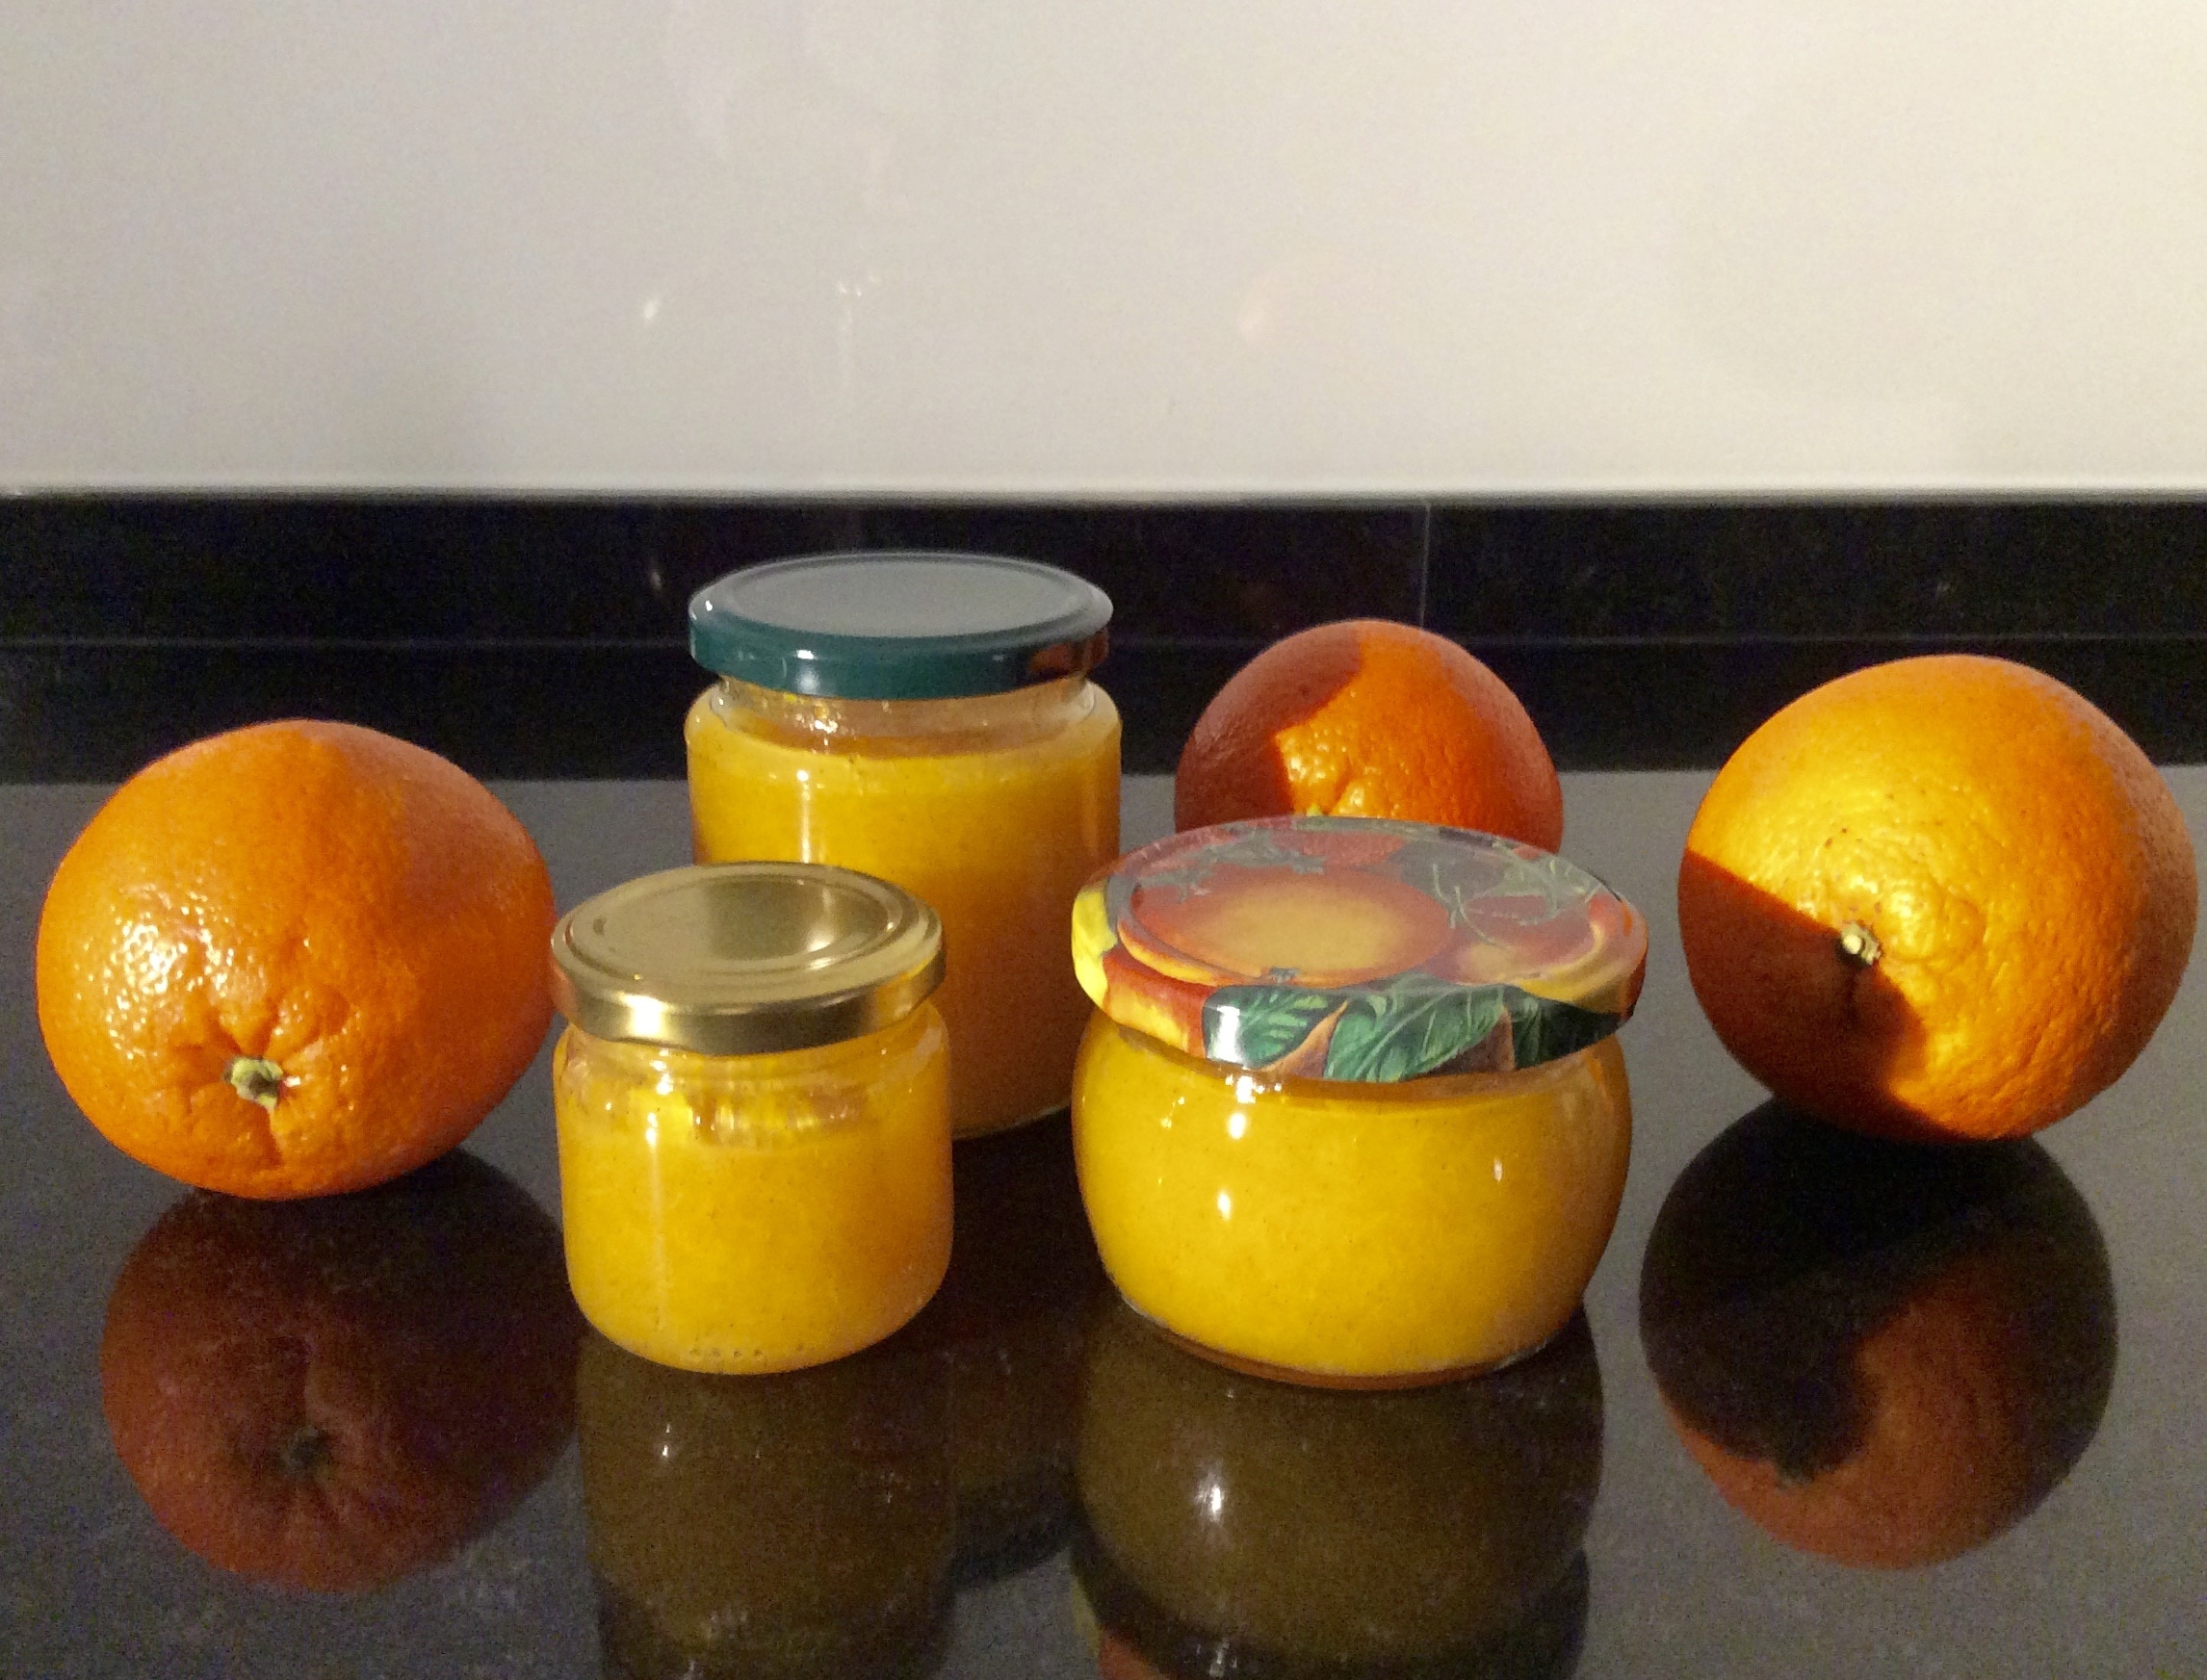 3 orange citrus fruits and clear glass container